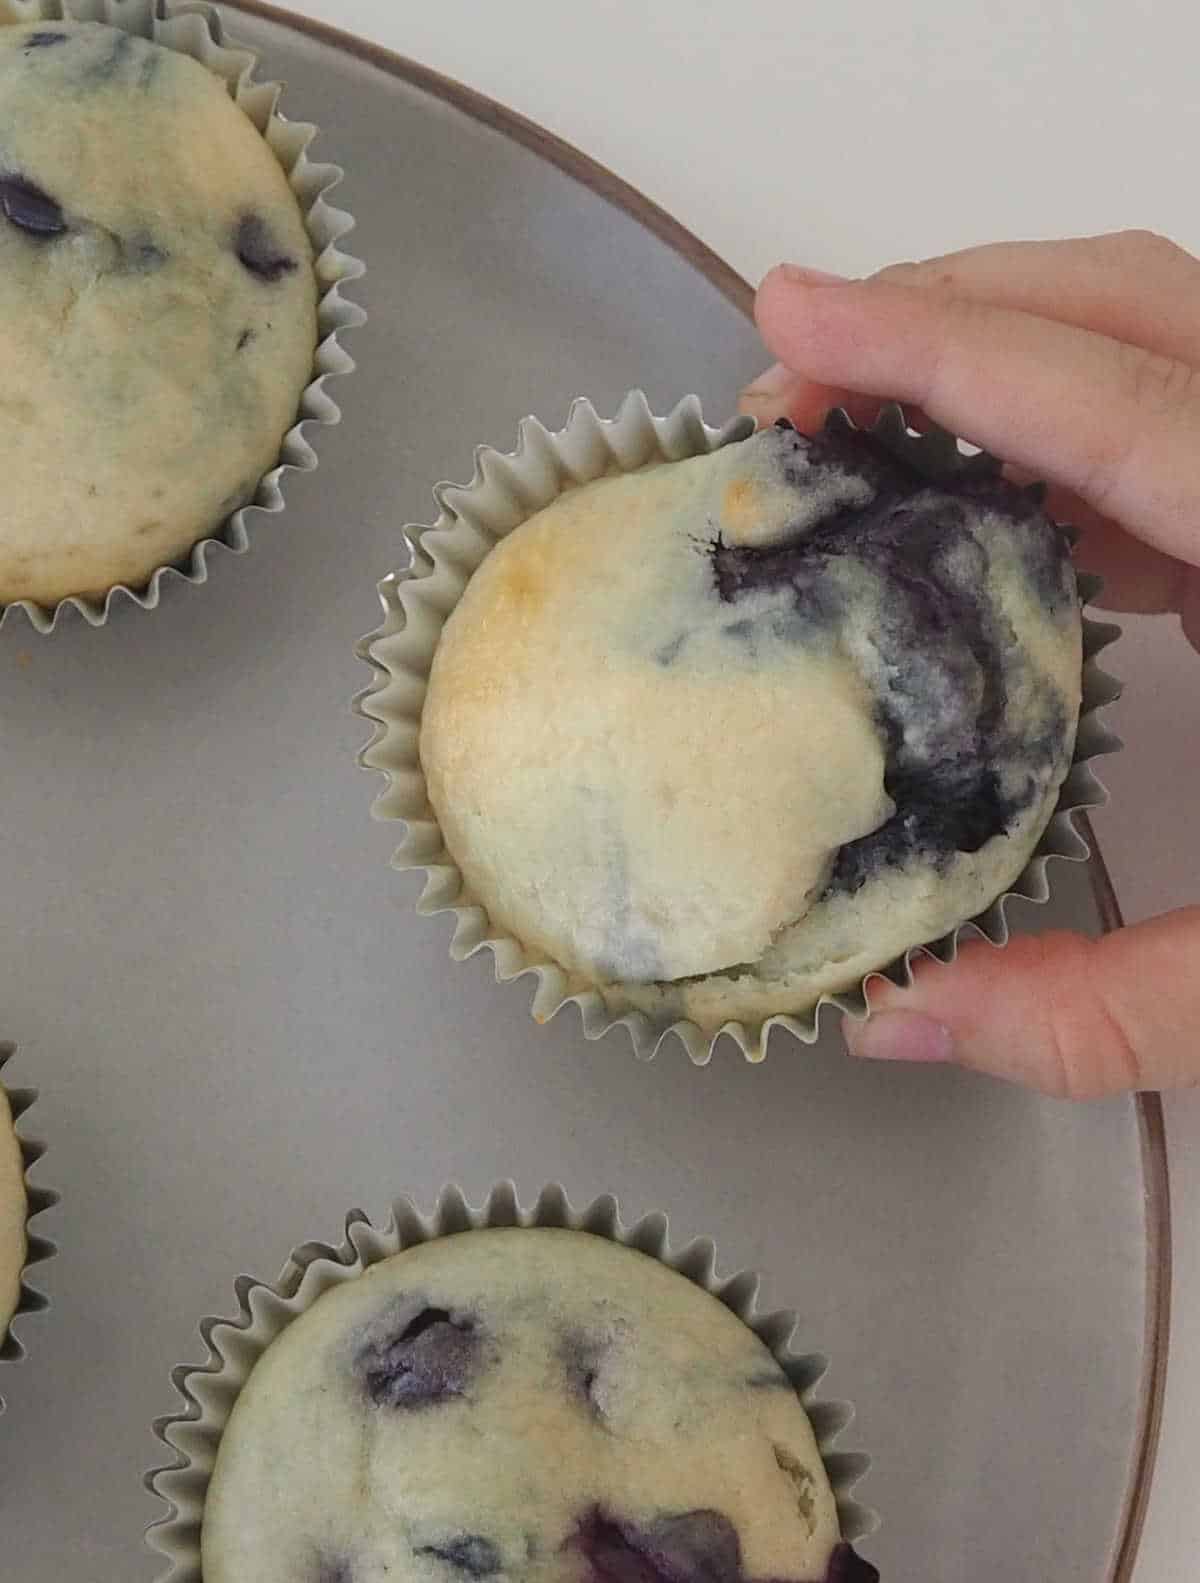 child's hand reaching for a blueberry muffin.